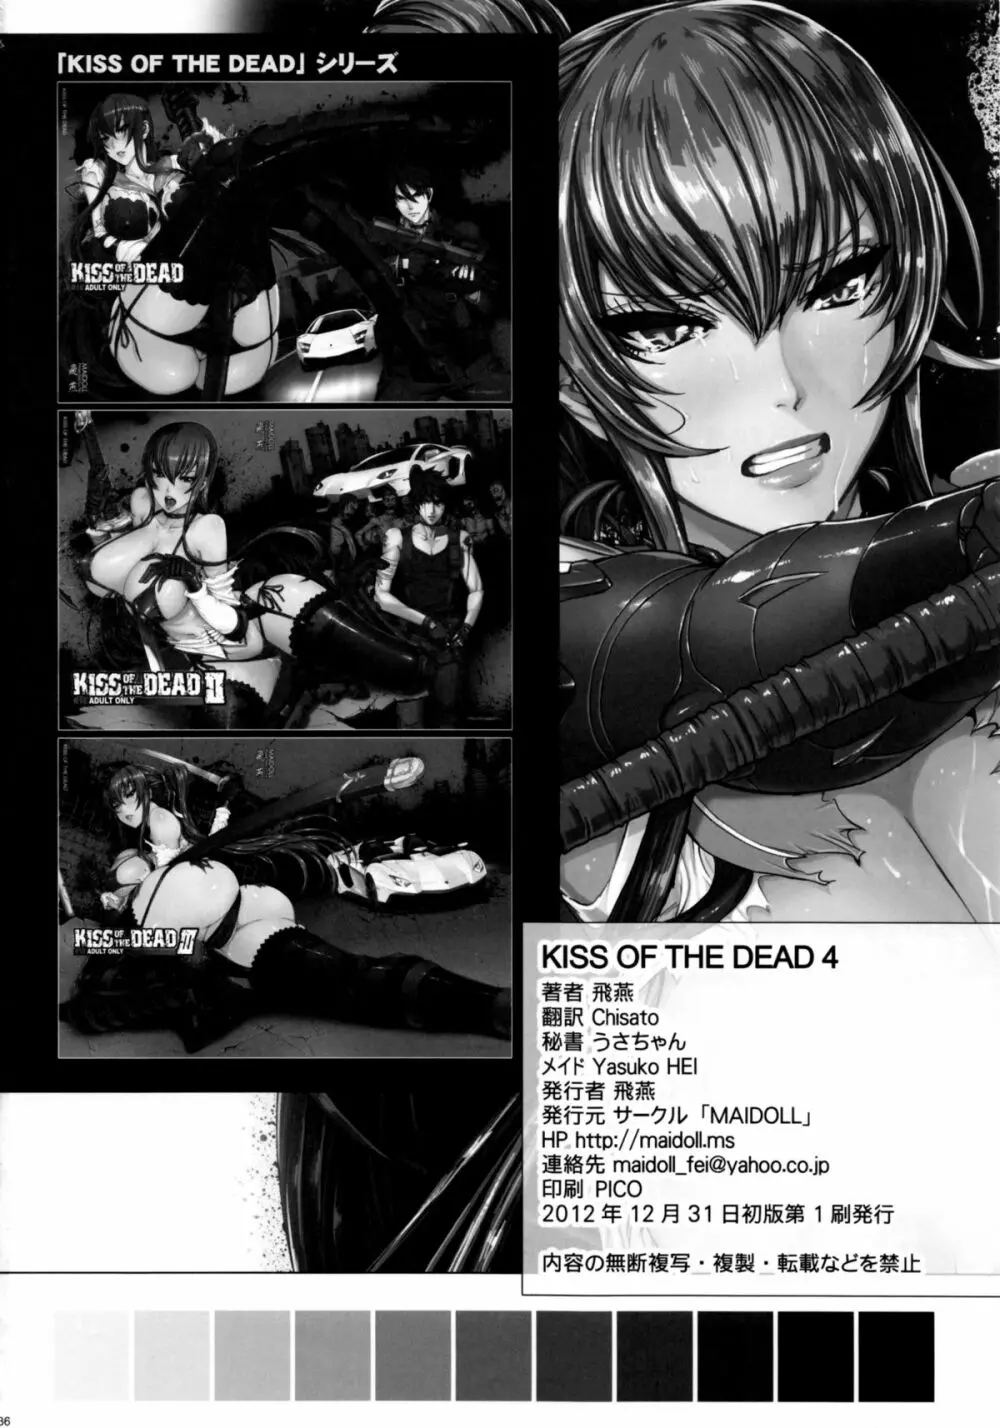 KISS OF THE DEAD 4 34ページ